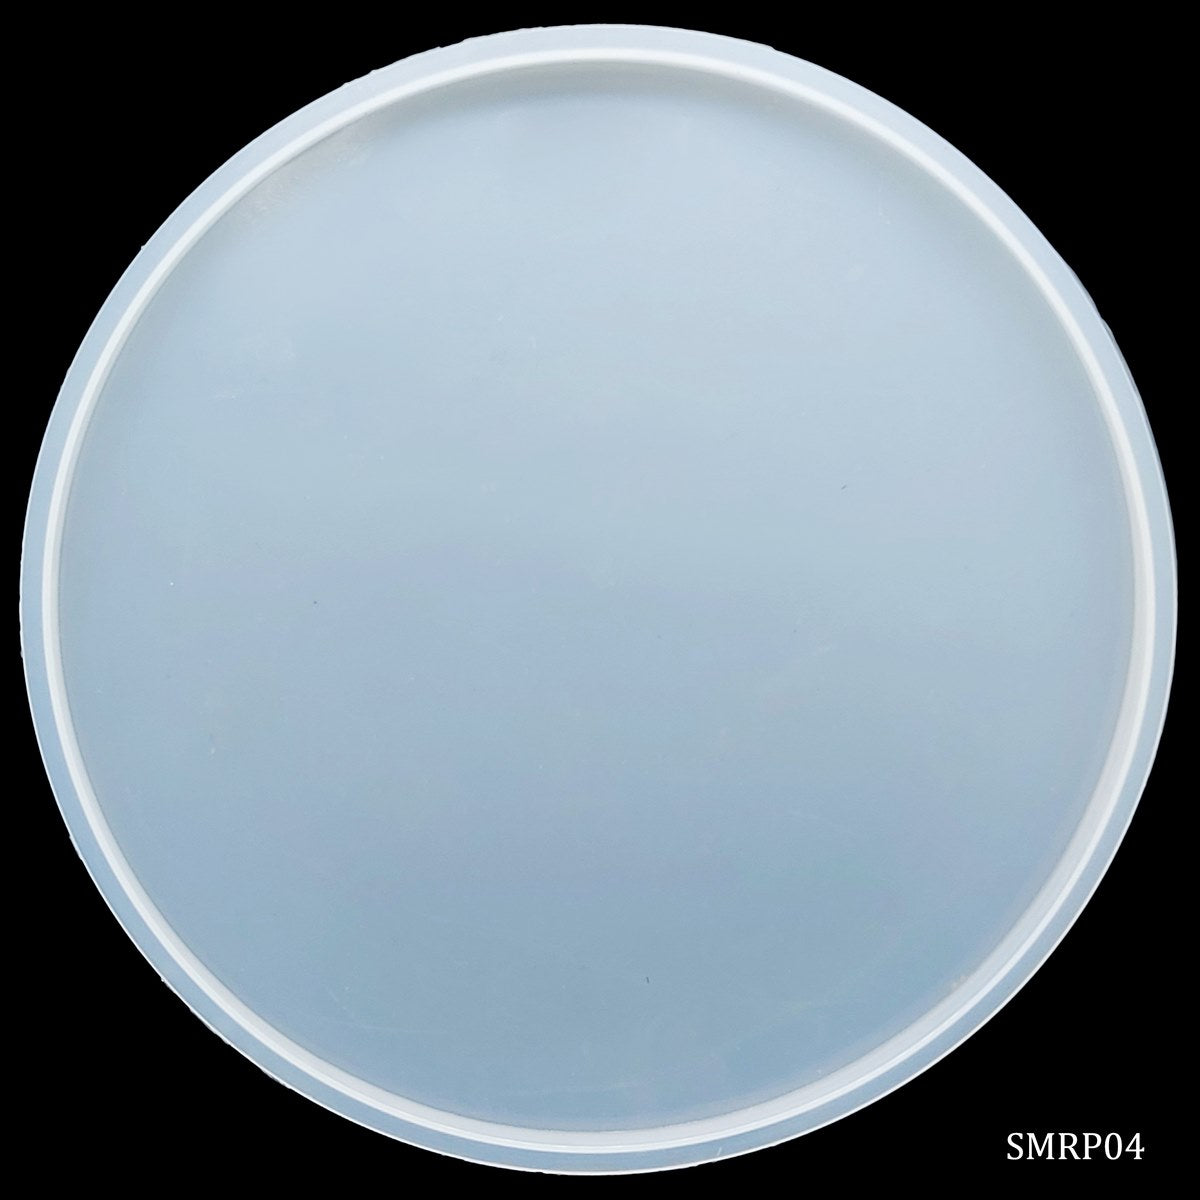 jags-mumbai Mould Silicone Mould Round Plate 14inch SMRP04